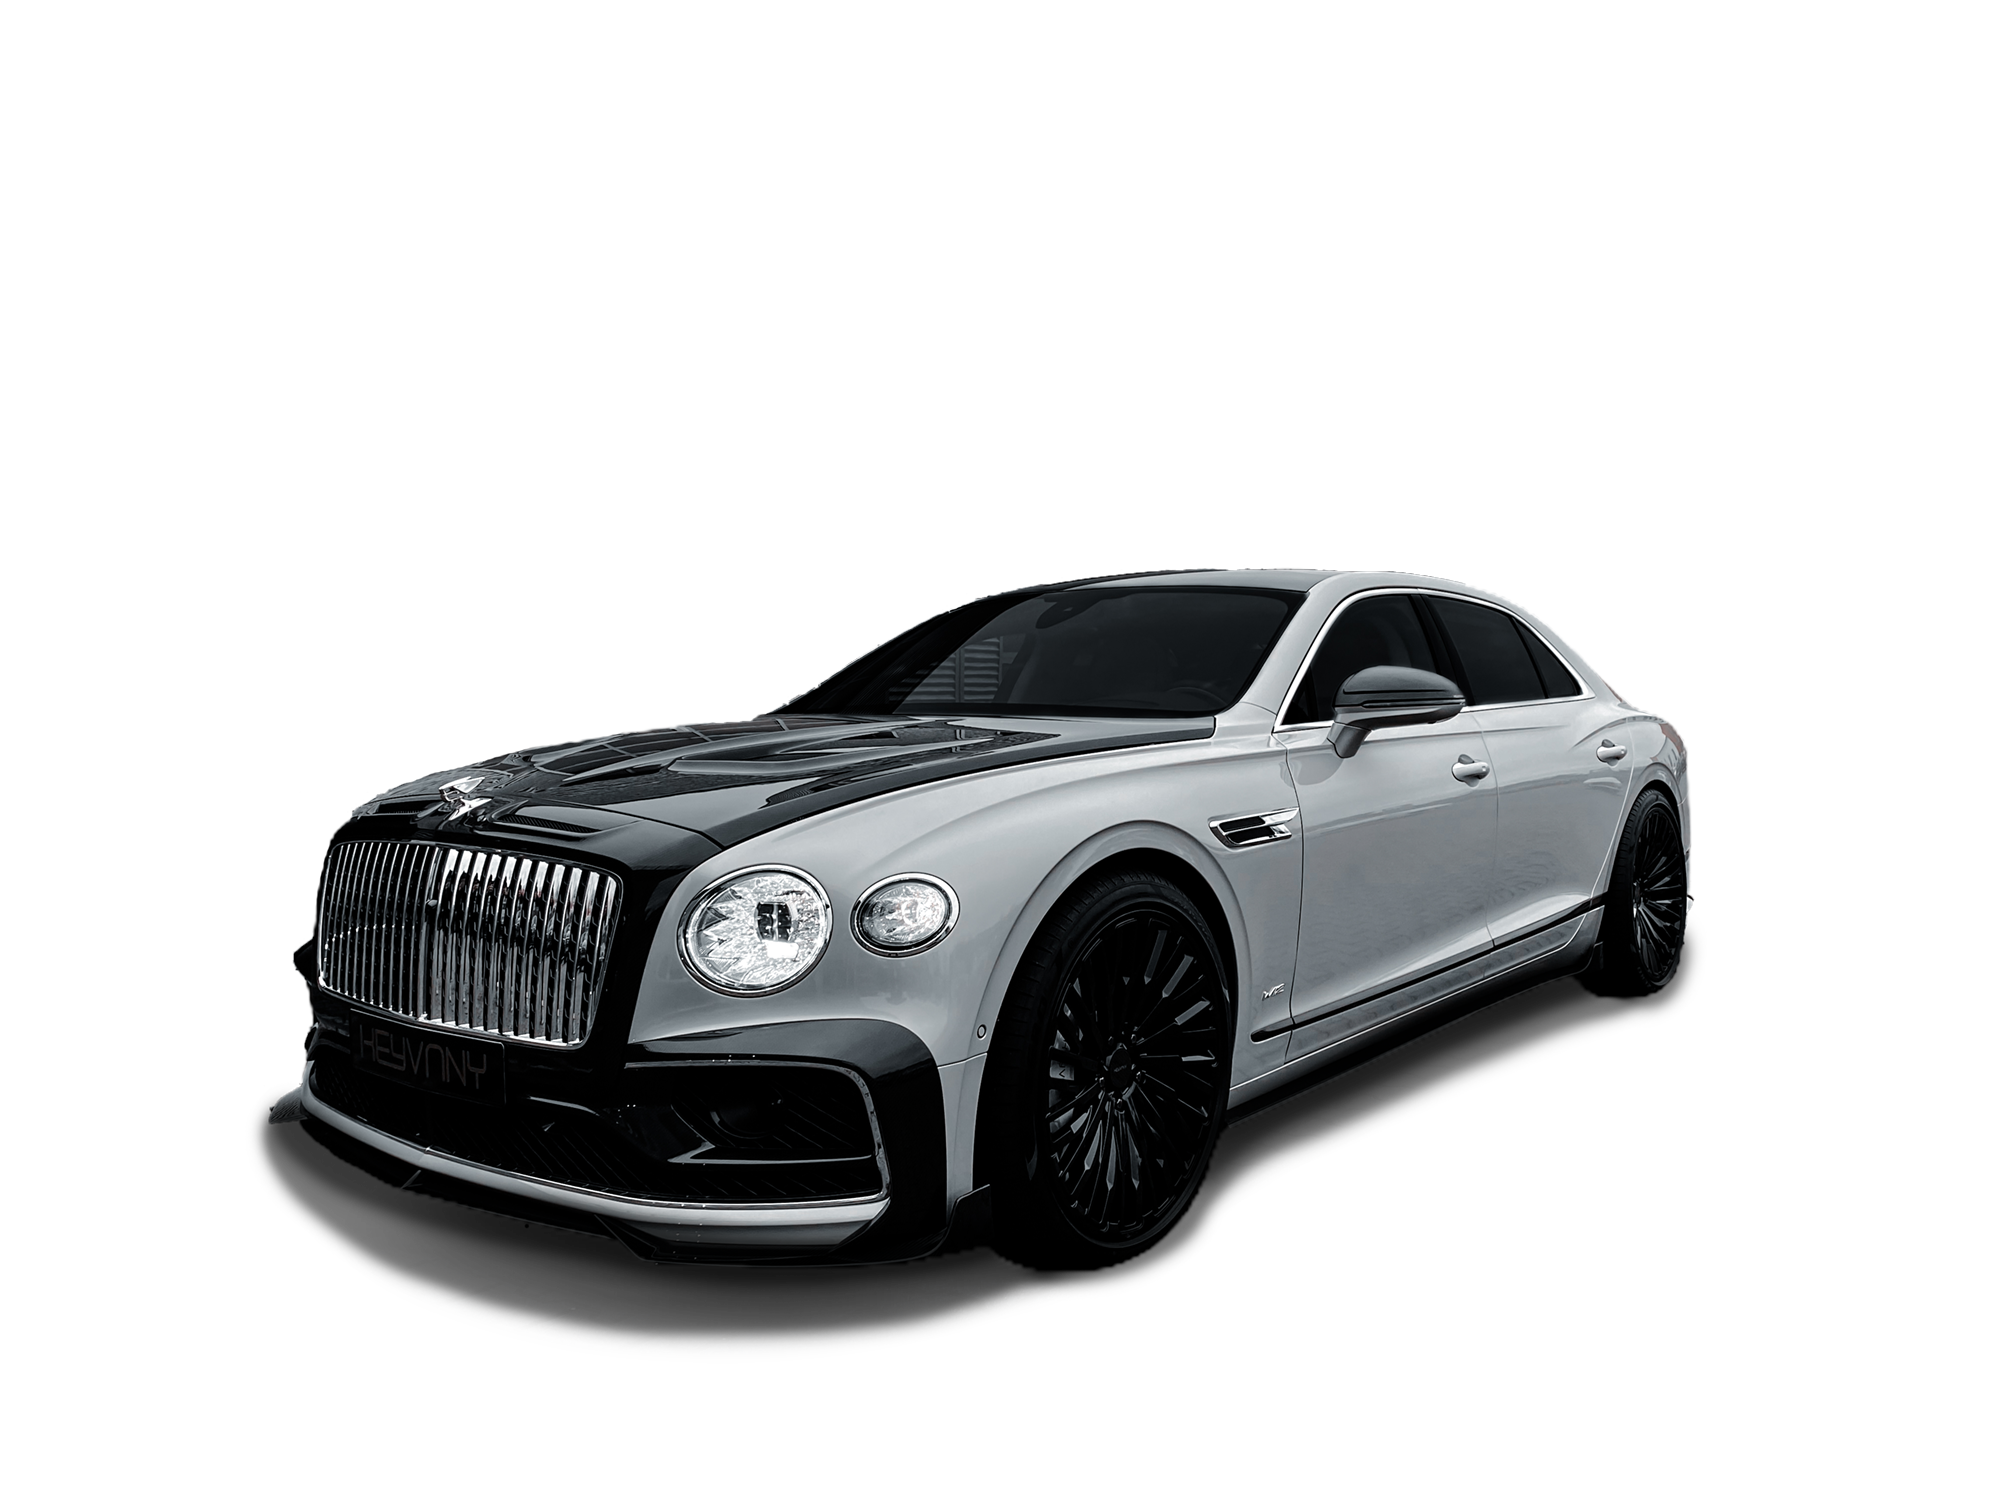 Check price and buy Keyvany Carbon Fiber Body kit set for Bentley Flying Spur